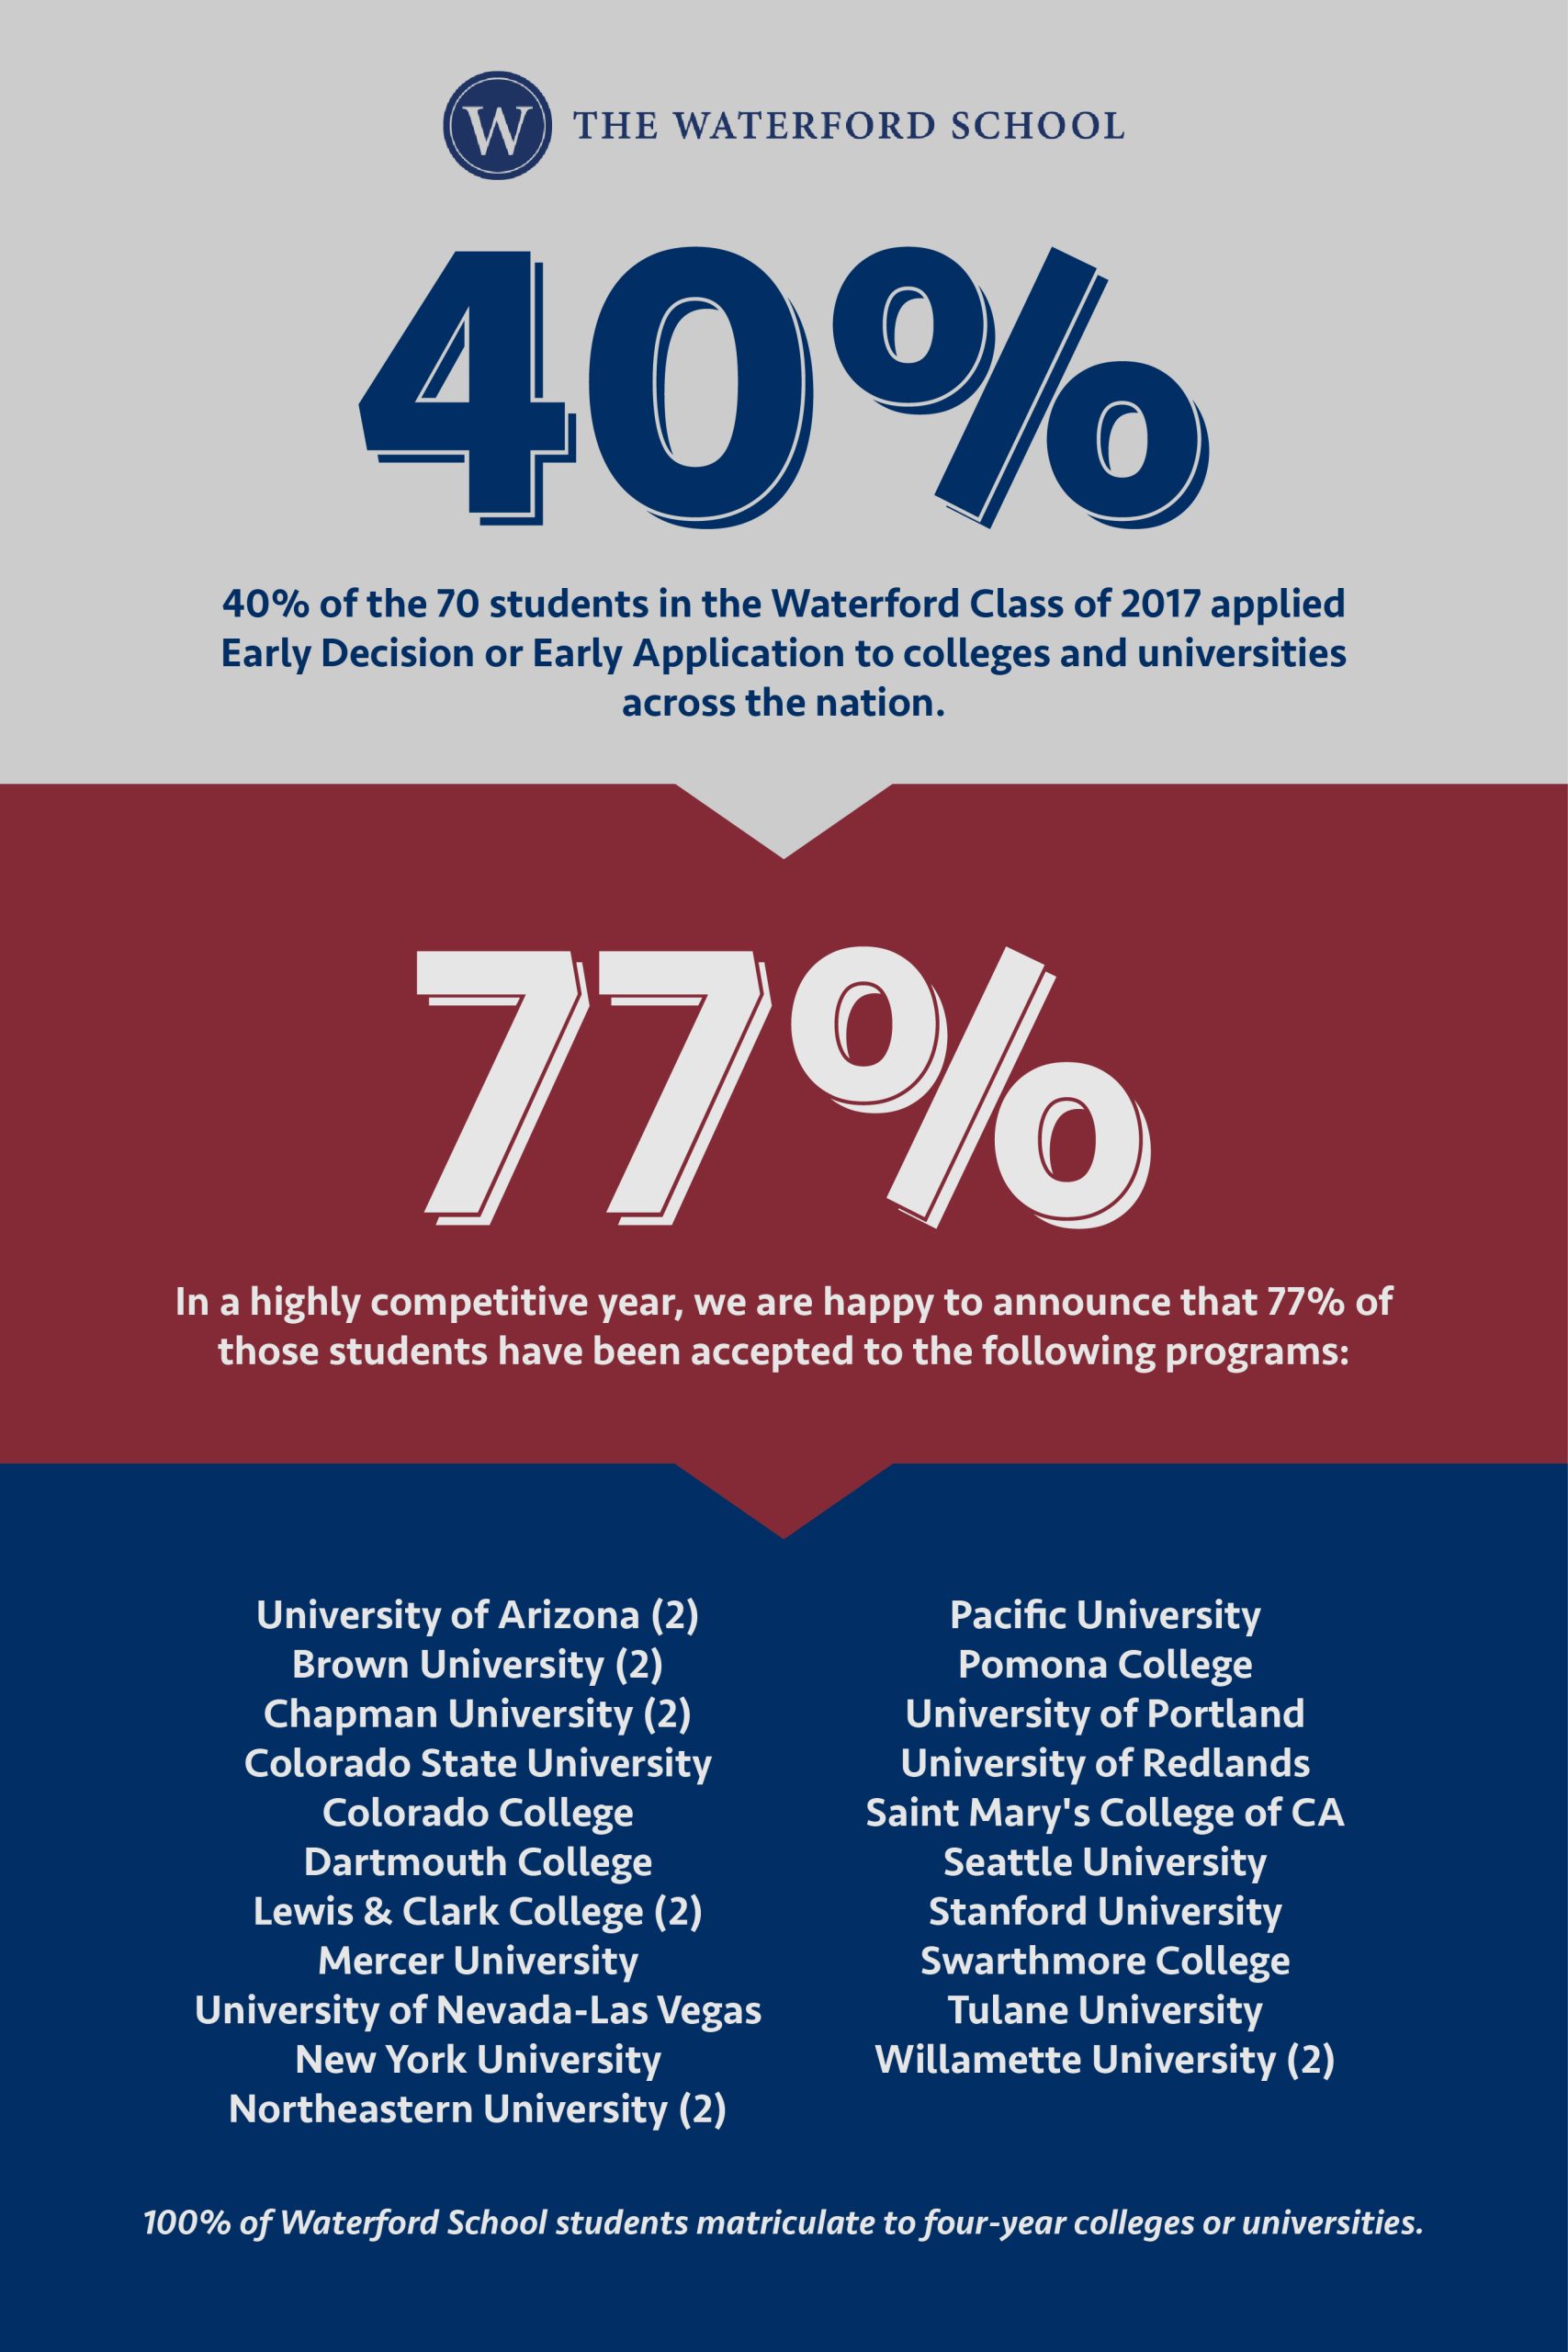 77% of Waterford's early applicants were accepted at highly competitive colleges and universities across the country.